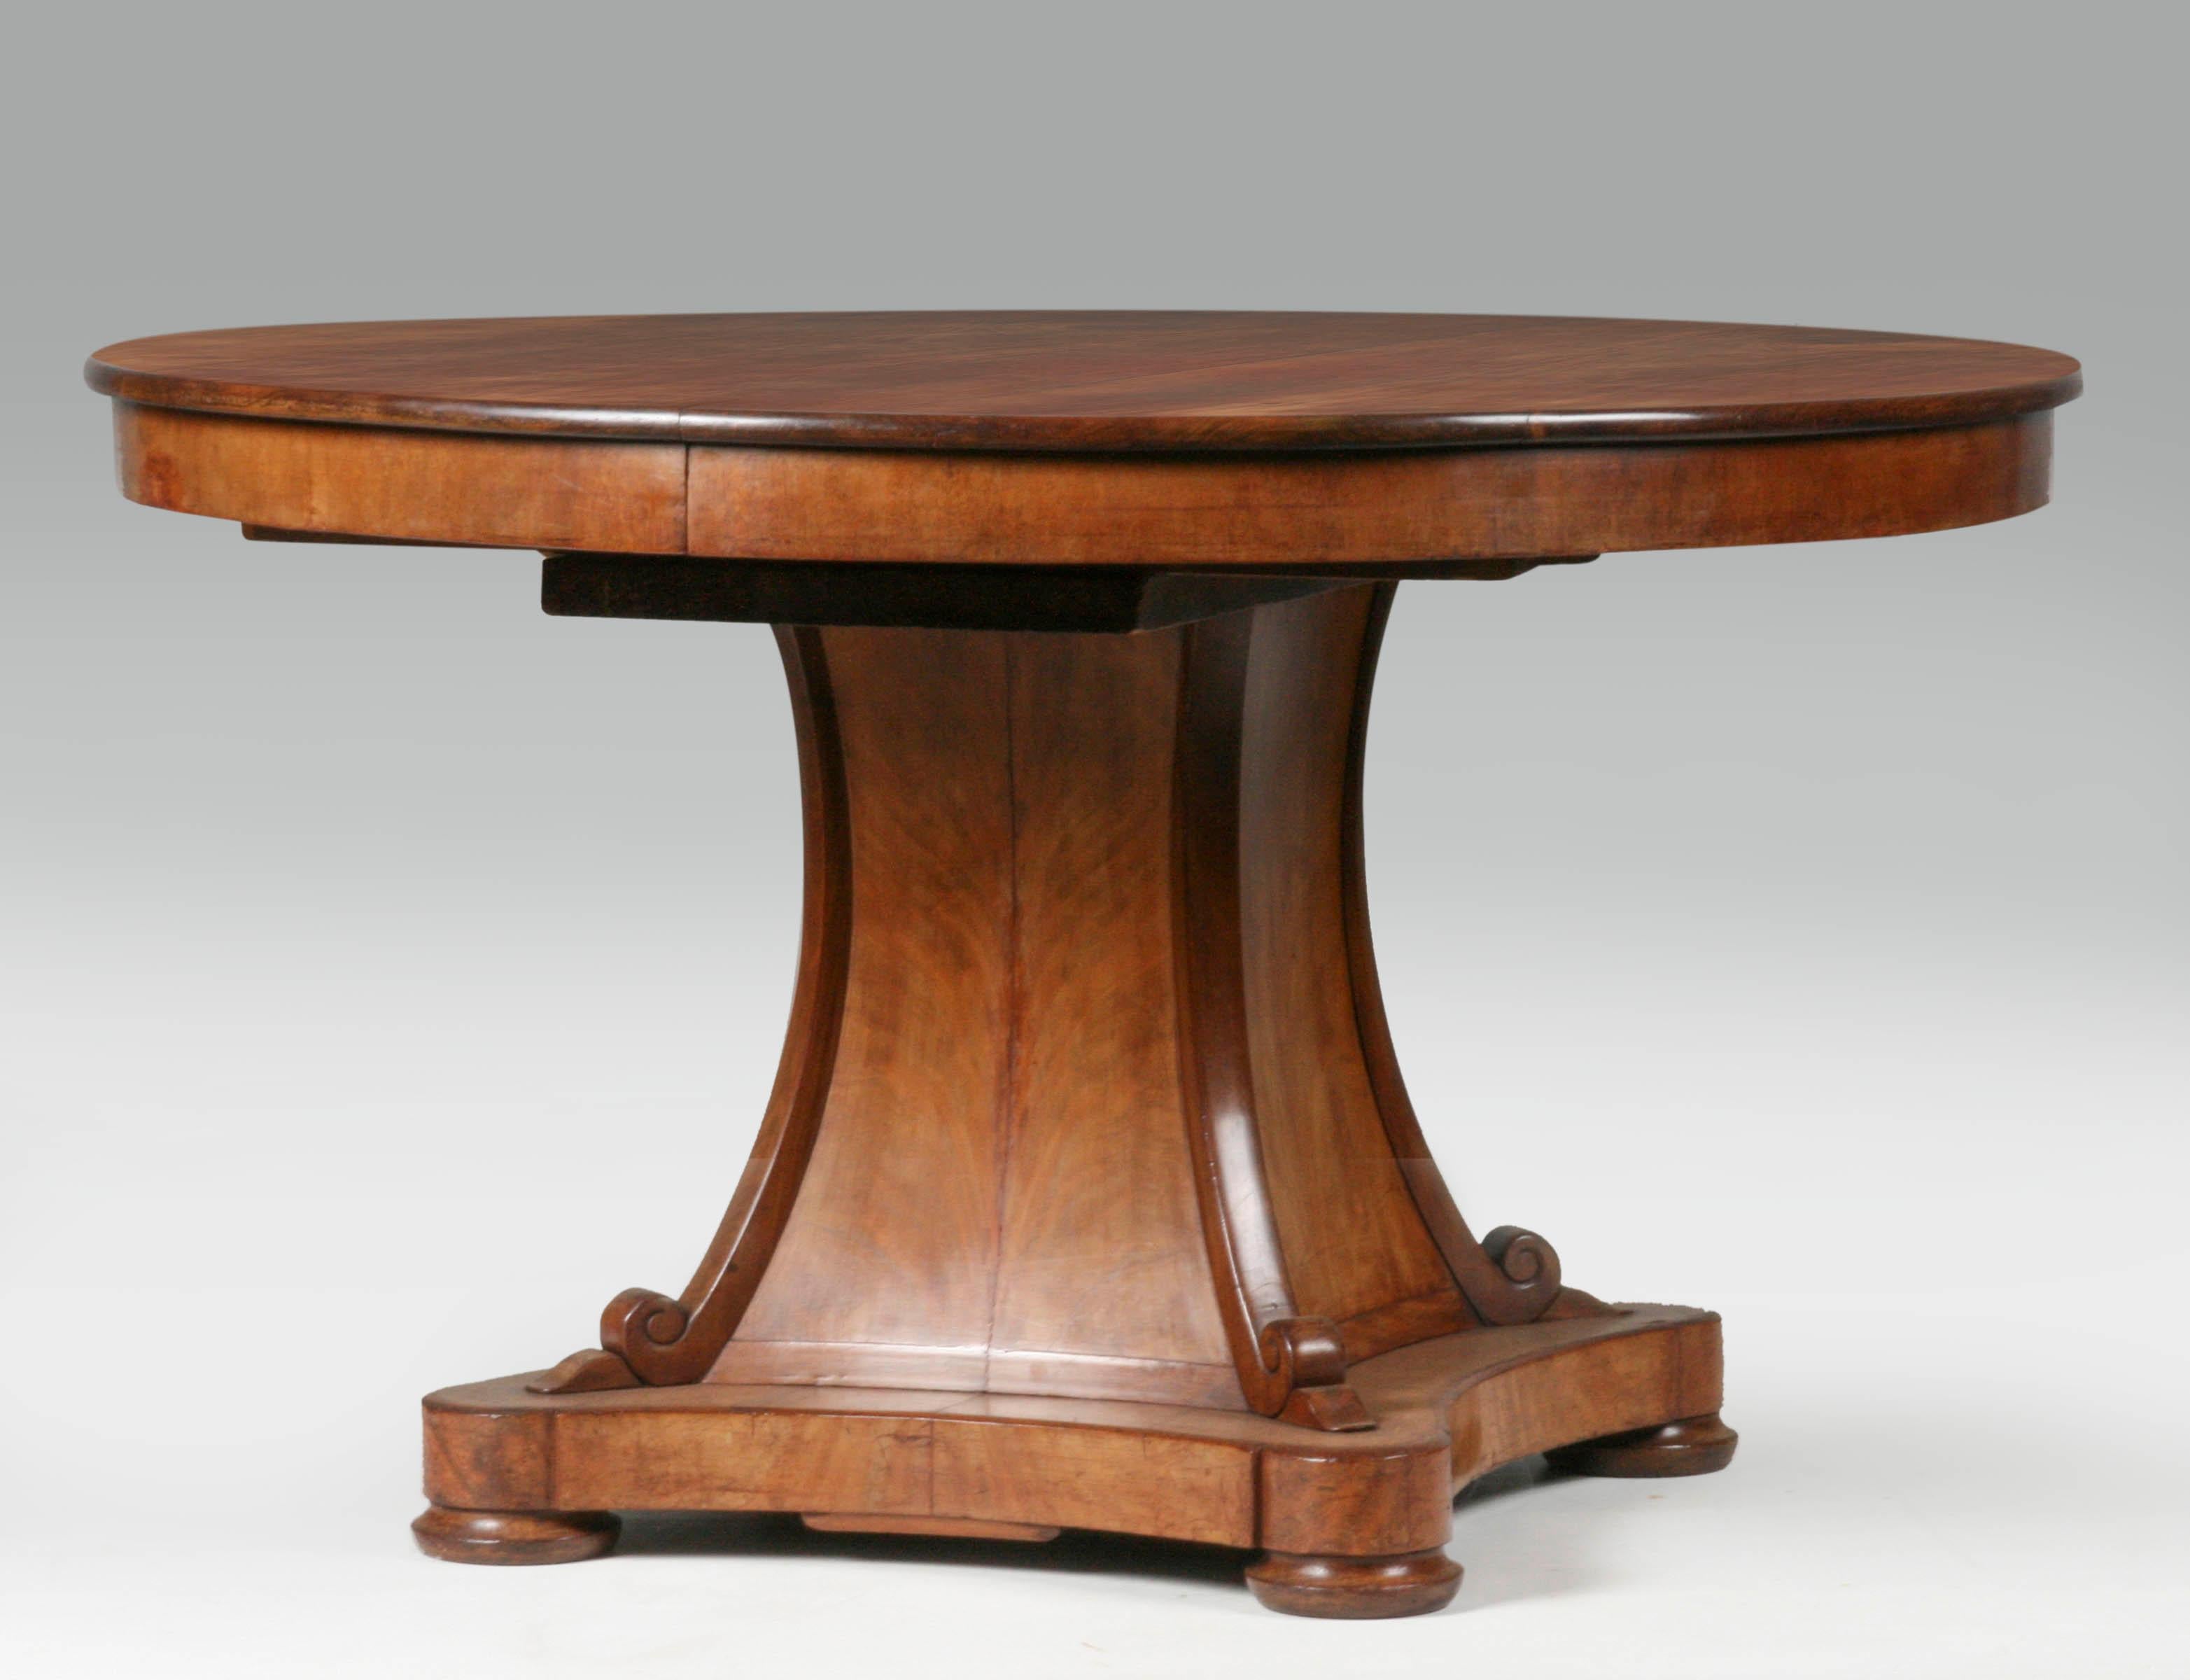 Round dining room table. Book matches mahogany veneered tabletop and base. This is a 